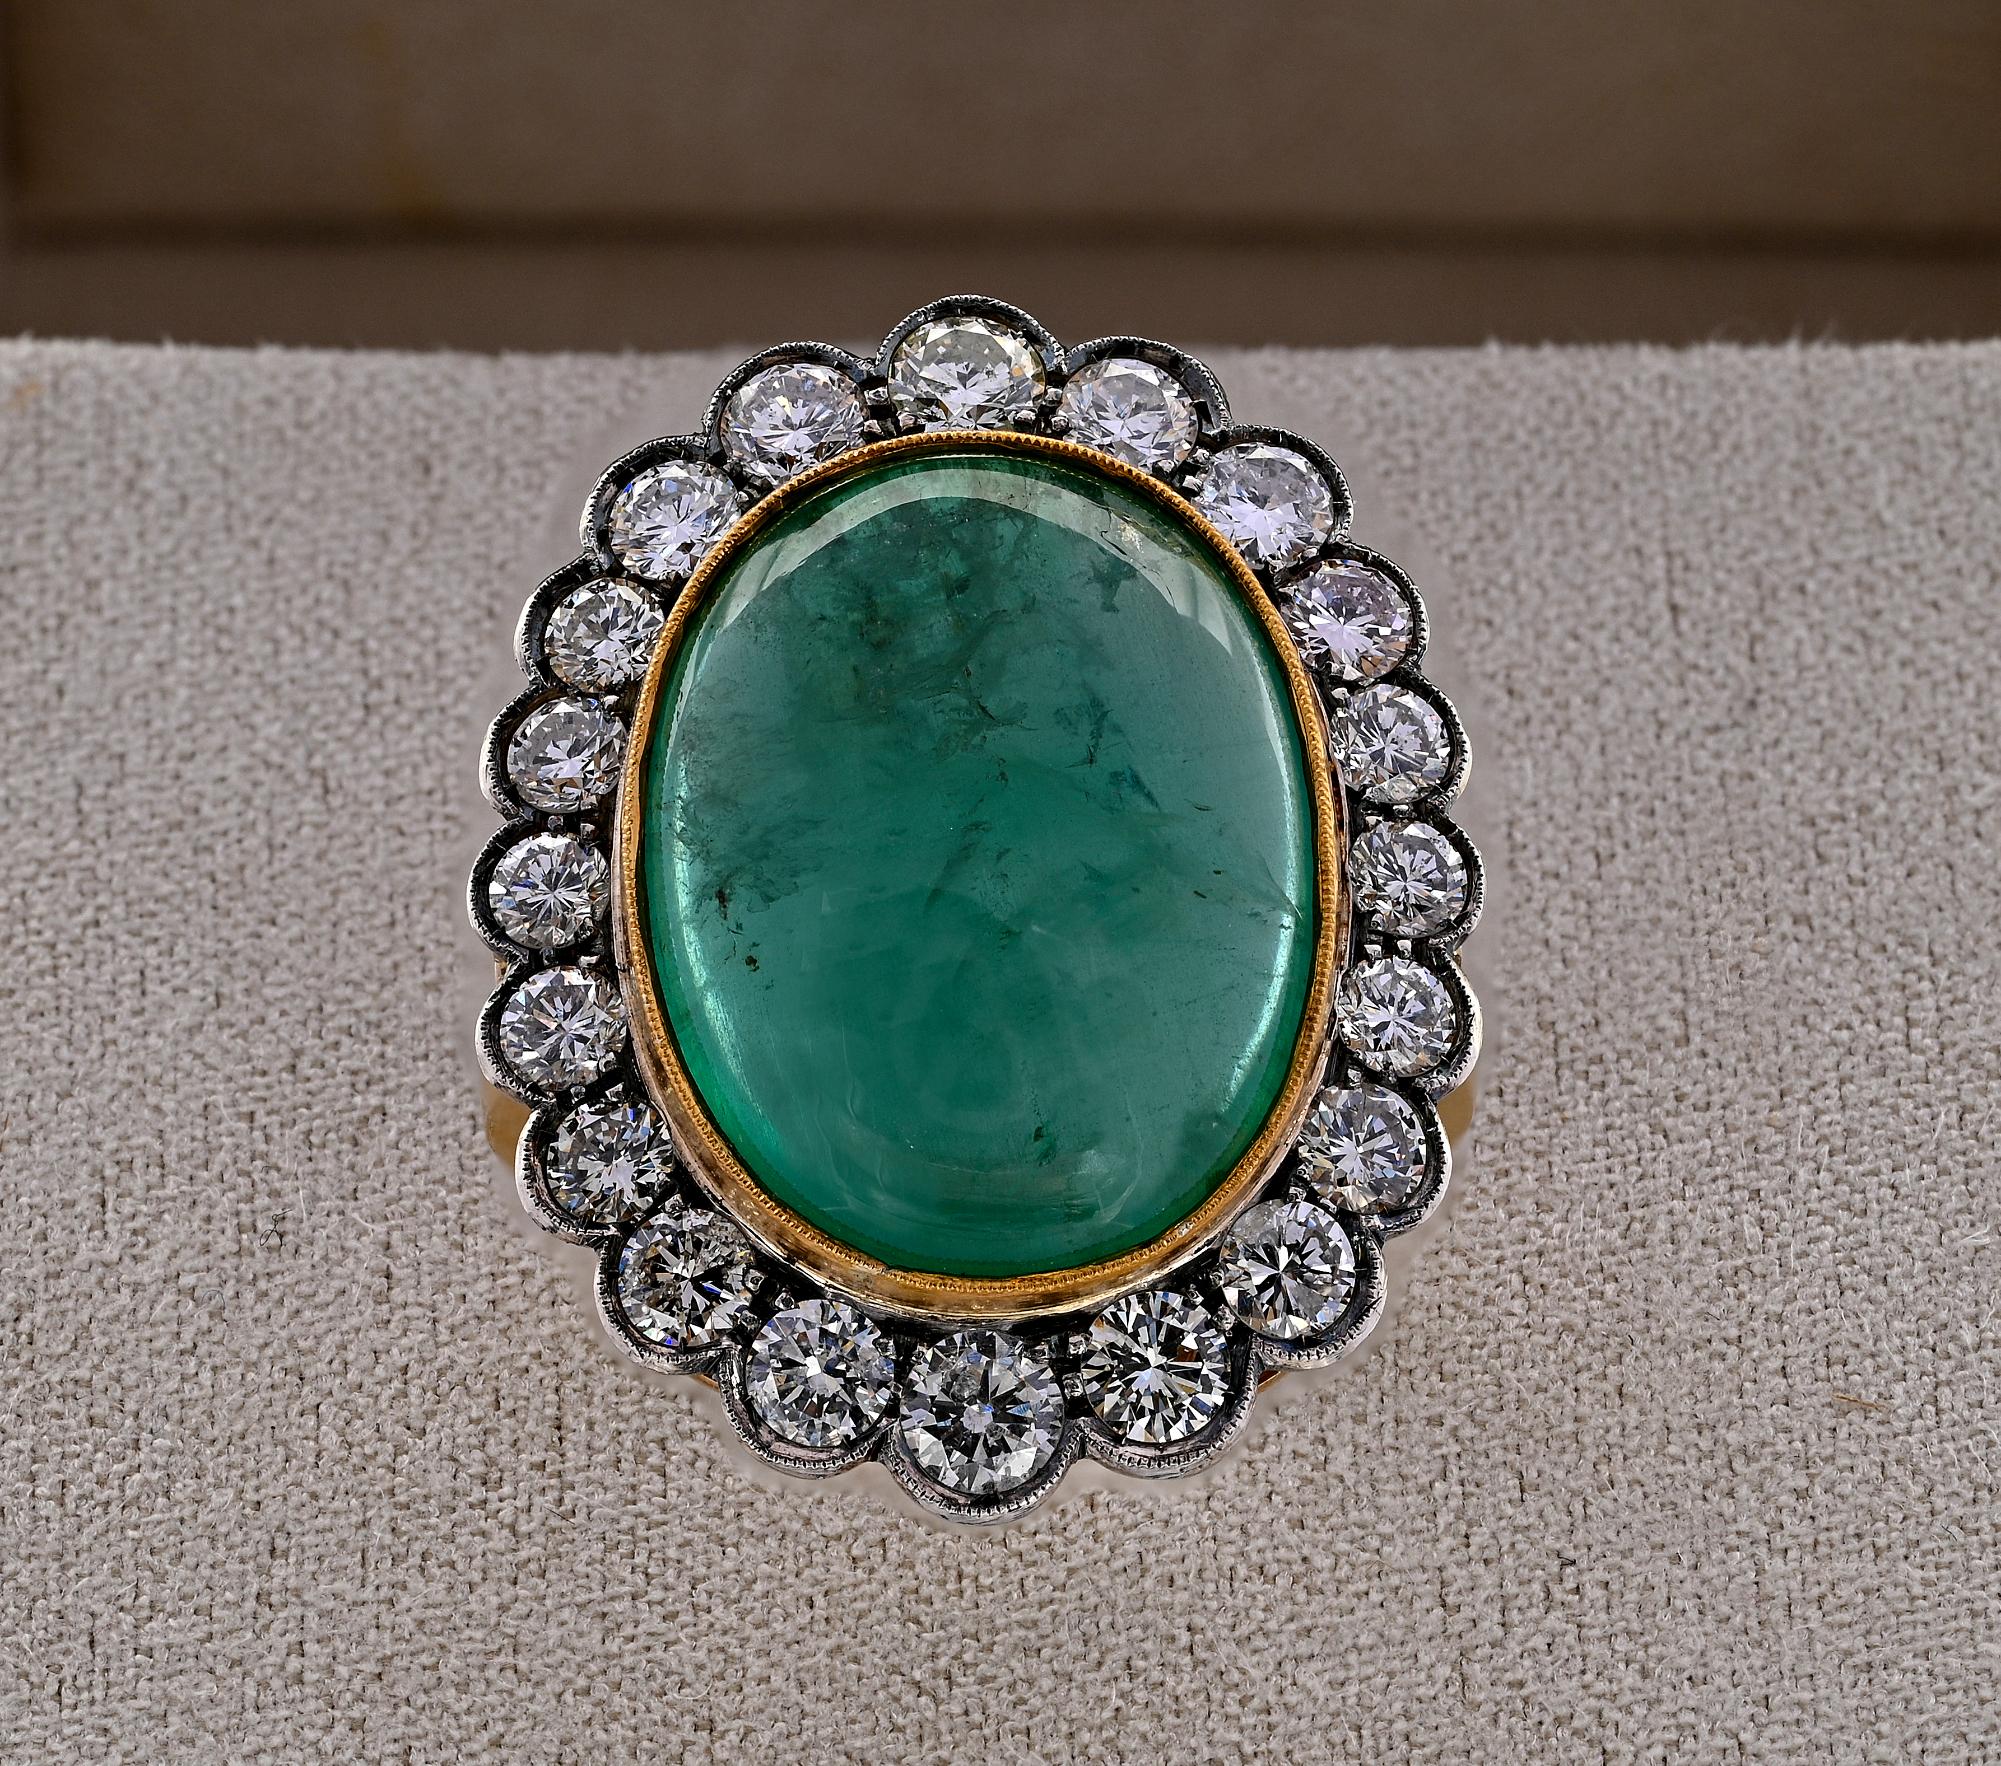 circa 1930/40
Hand constructed of solid 18 Kt gold with silver portions for the Diamonds housing
Large over sized oval shape with an amazing impact to the viewer
Centrally set with an antique oval cabochon cut Emerald – 14.90 Ct (17.96 x 13.79 mm.)